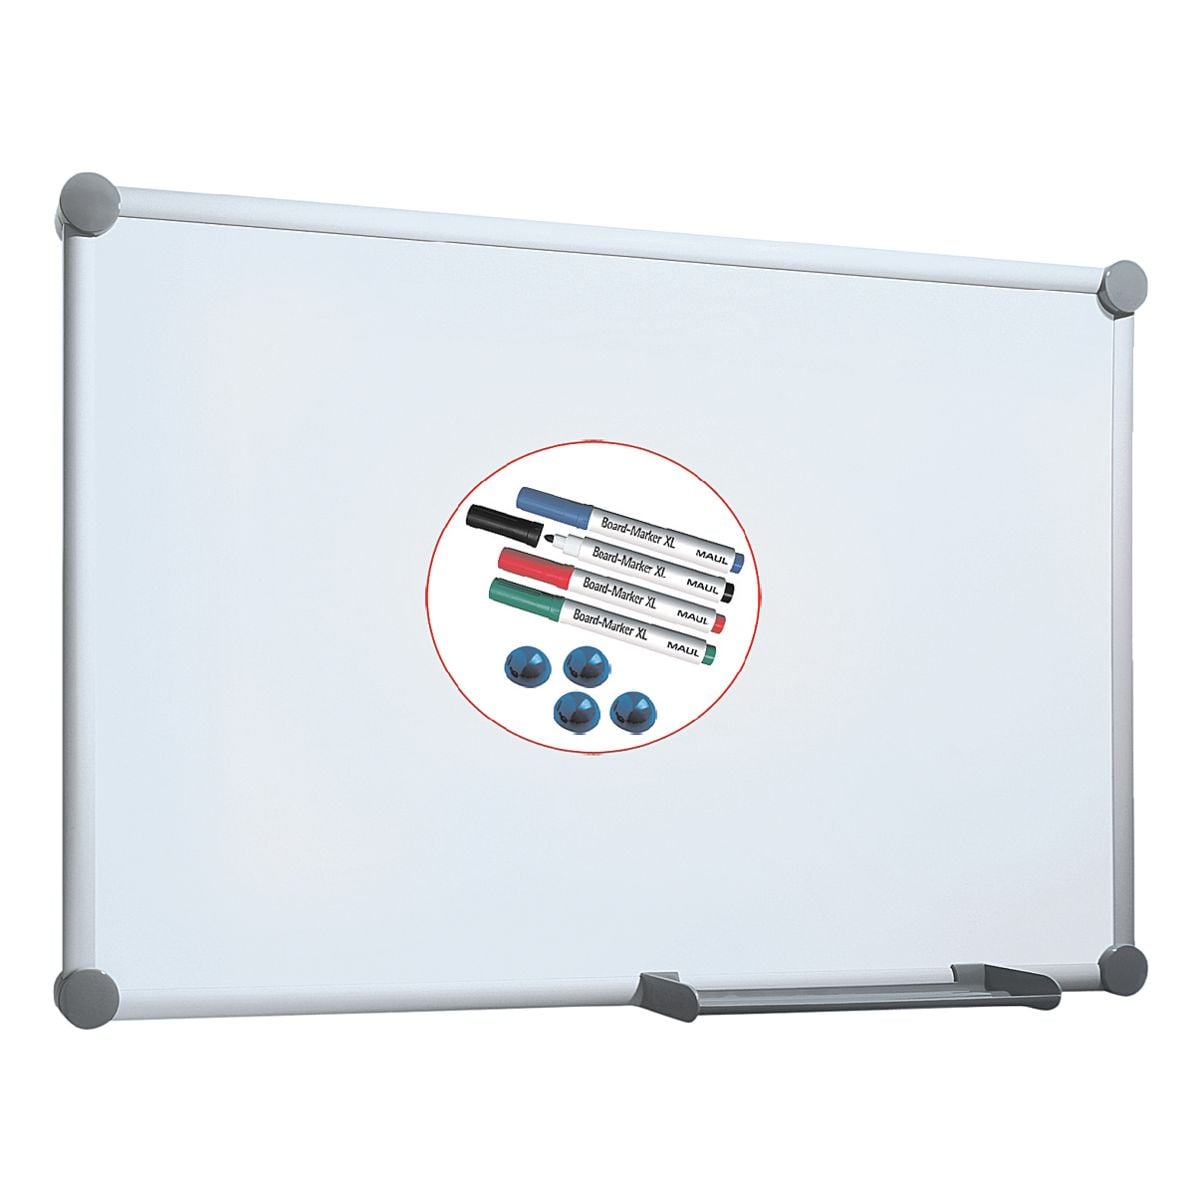 Maul Whiteboard 2000 Maulpro 6305984 emailliert, 200x100 cm